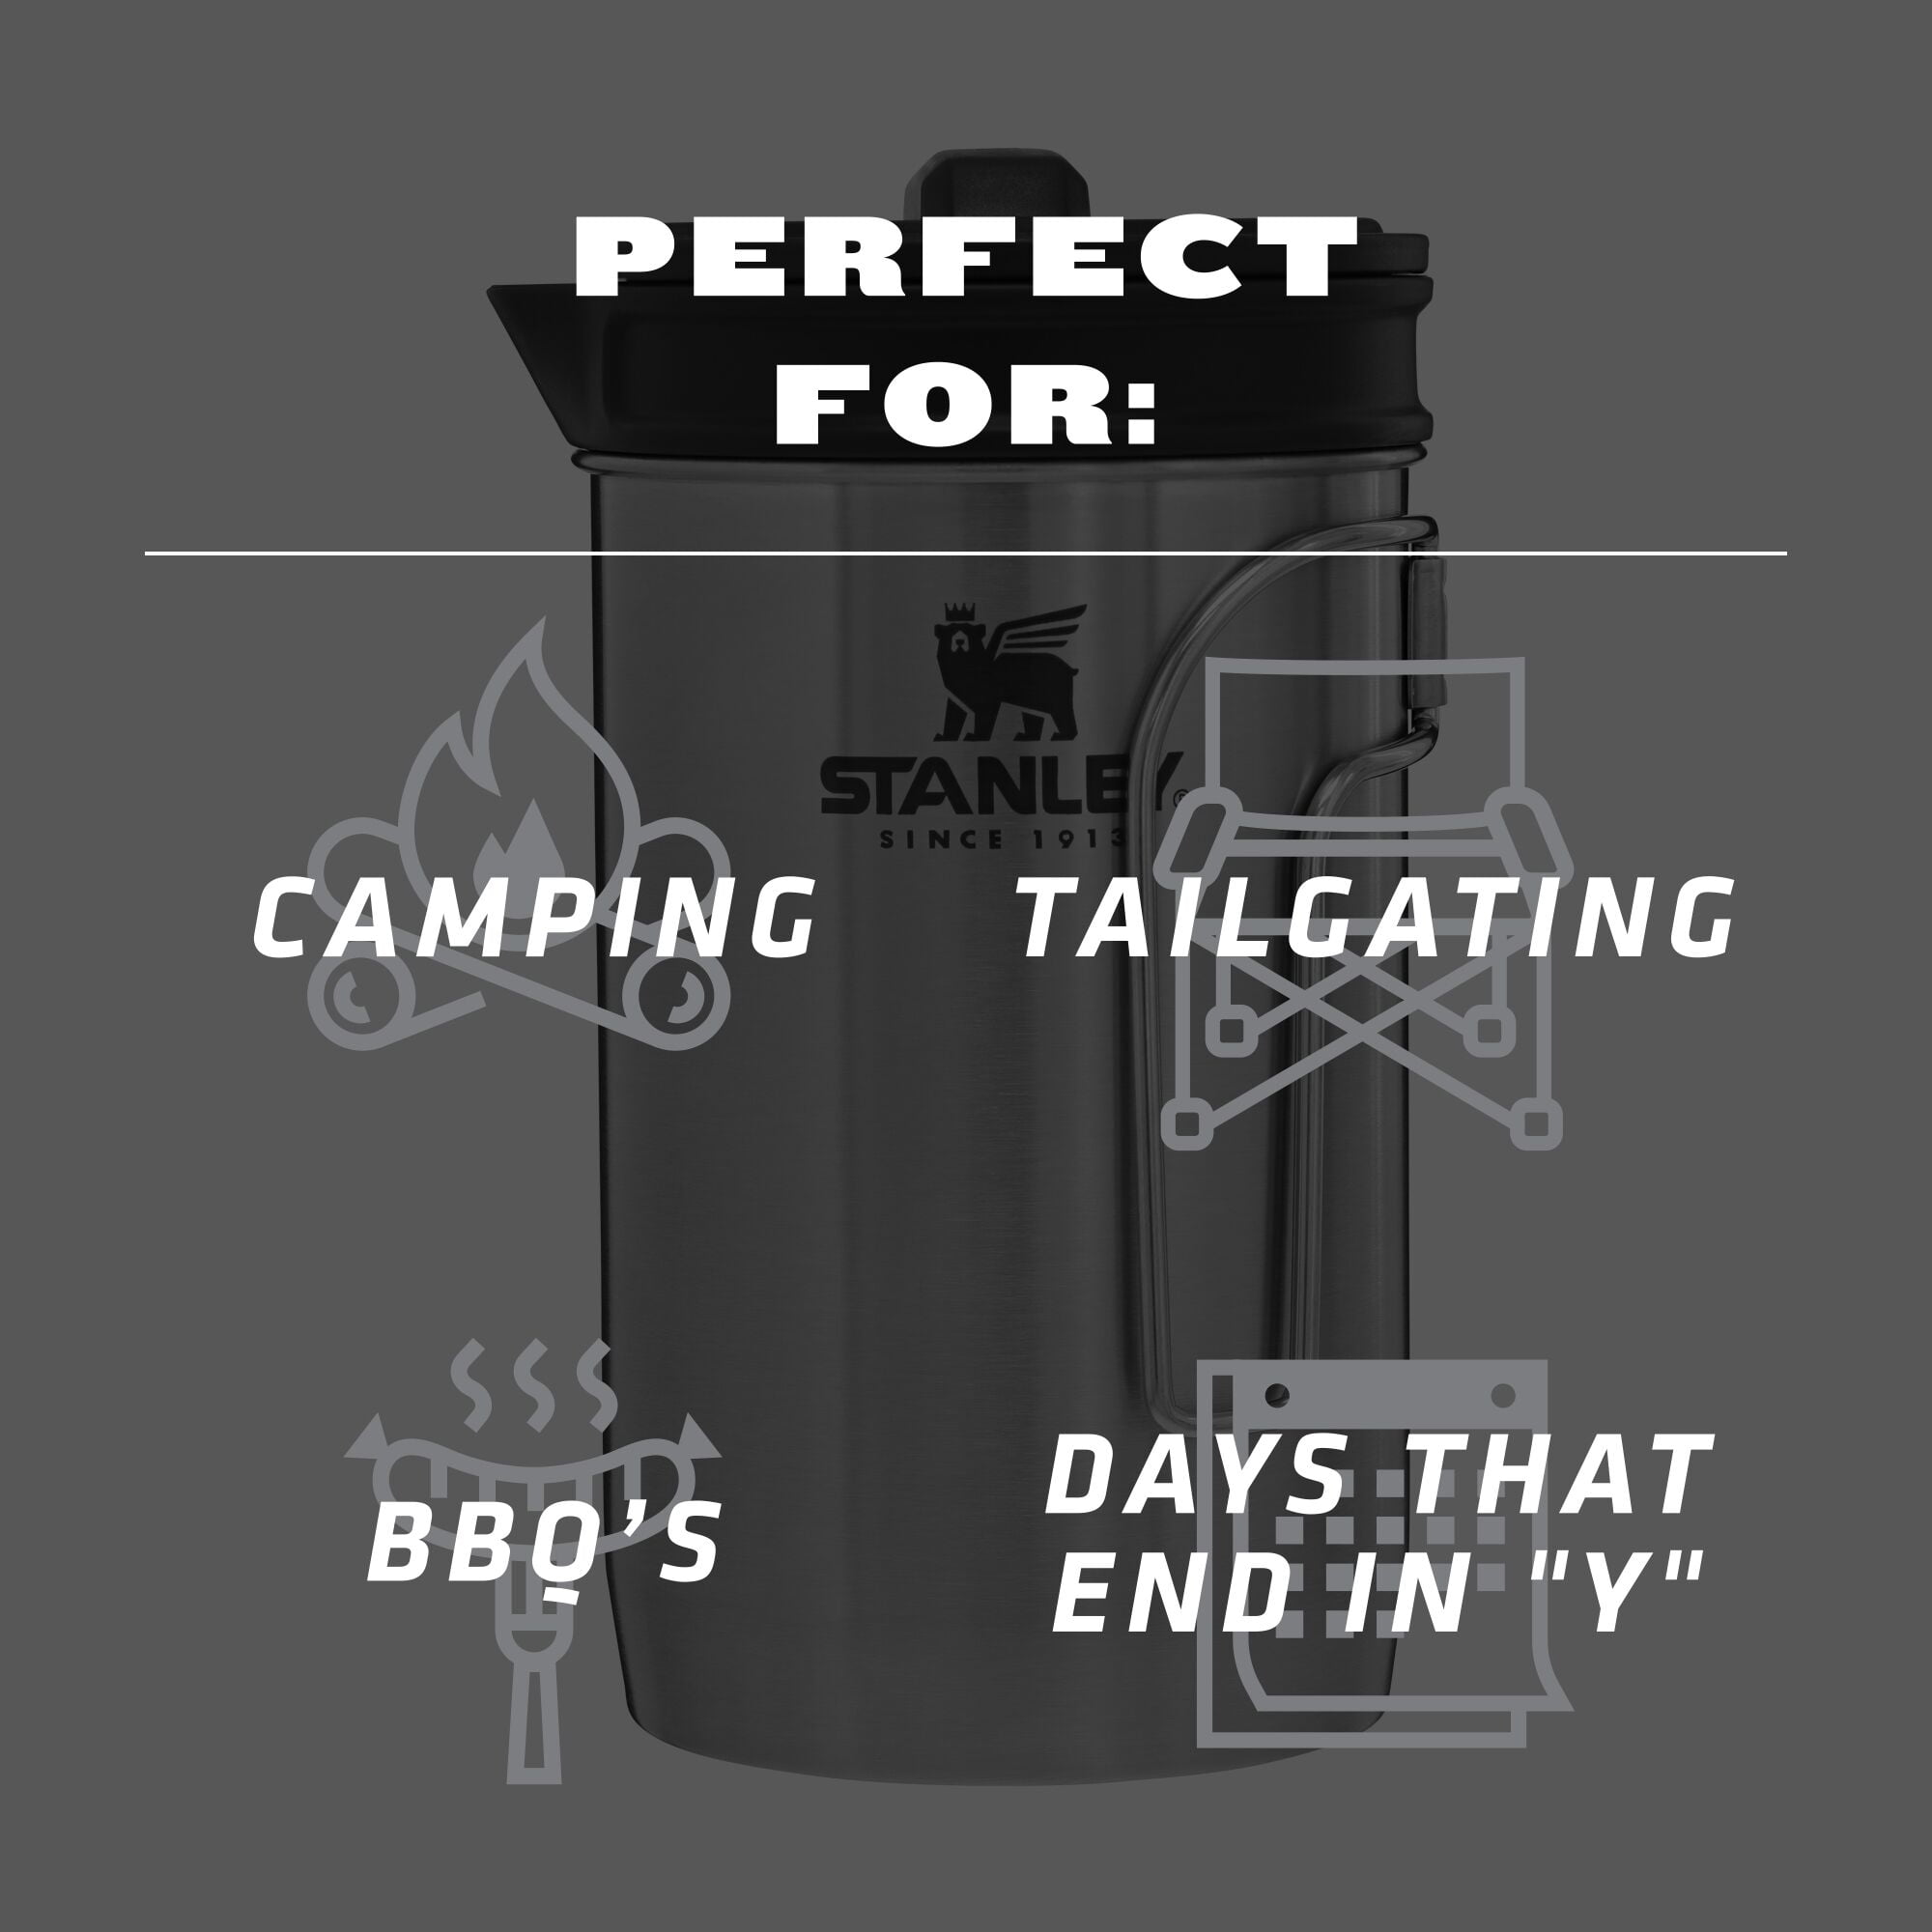 Stanley ADVENTURE ALL-IN-ONE BOIL + BREW FRENCH PRESS